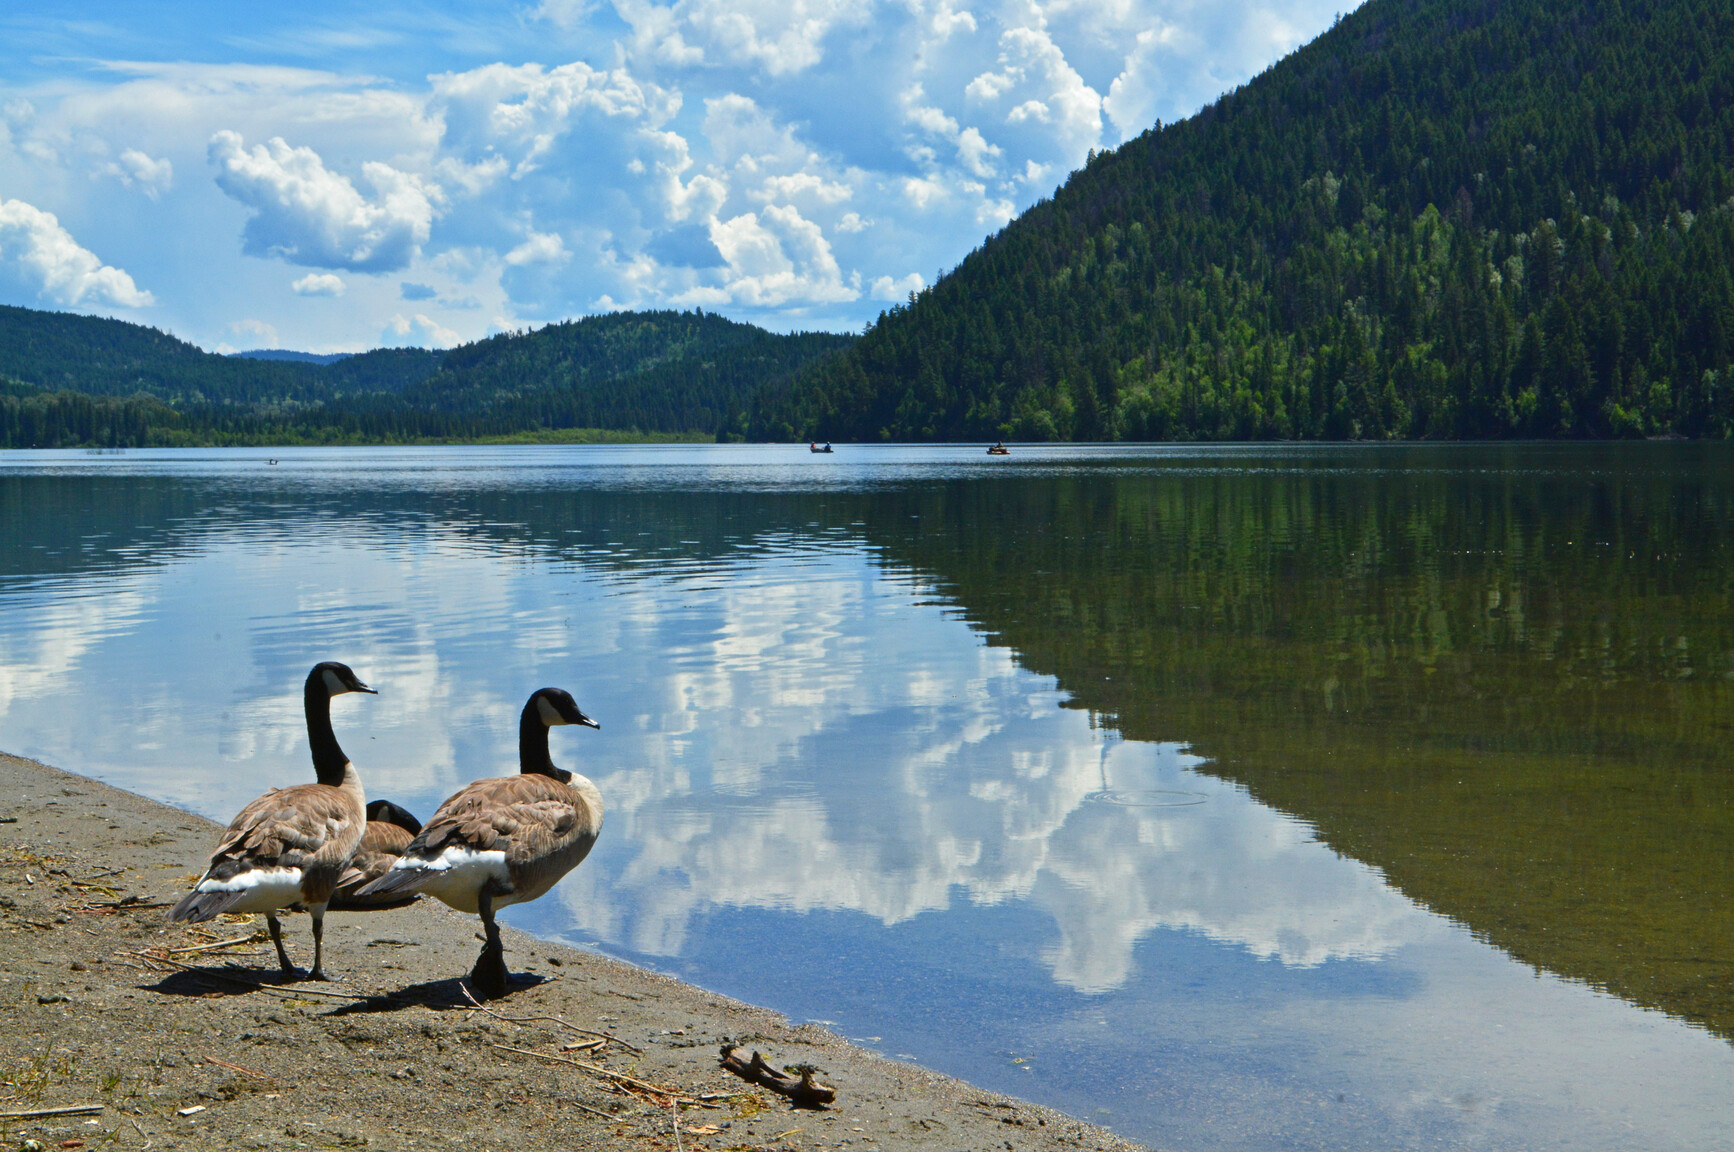 Canada geese on beach by the lake. Mountains in the background are reflecting on the lake. People in boats fishing.